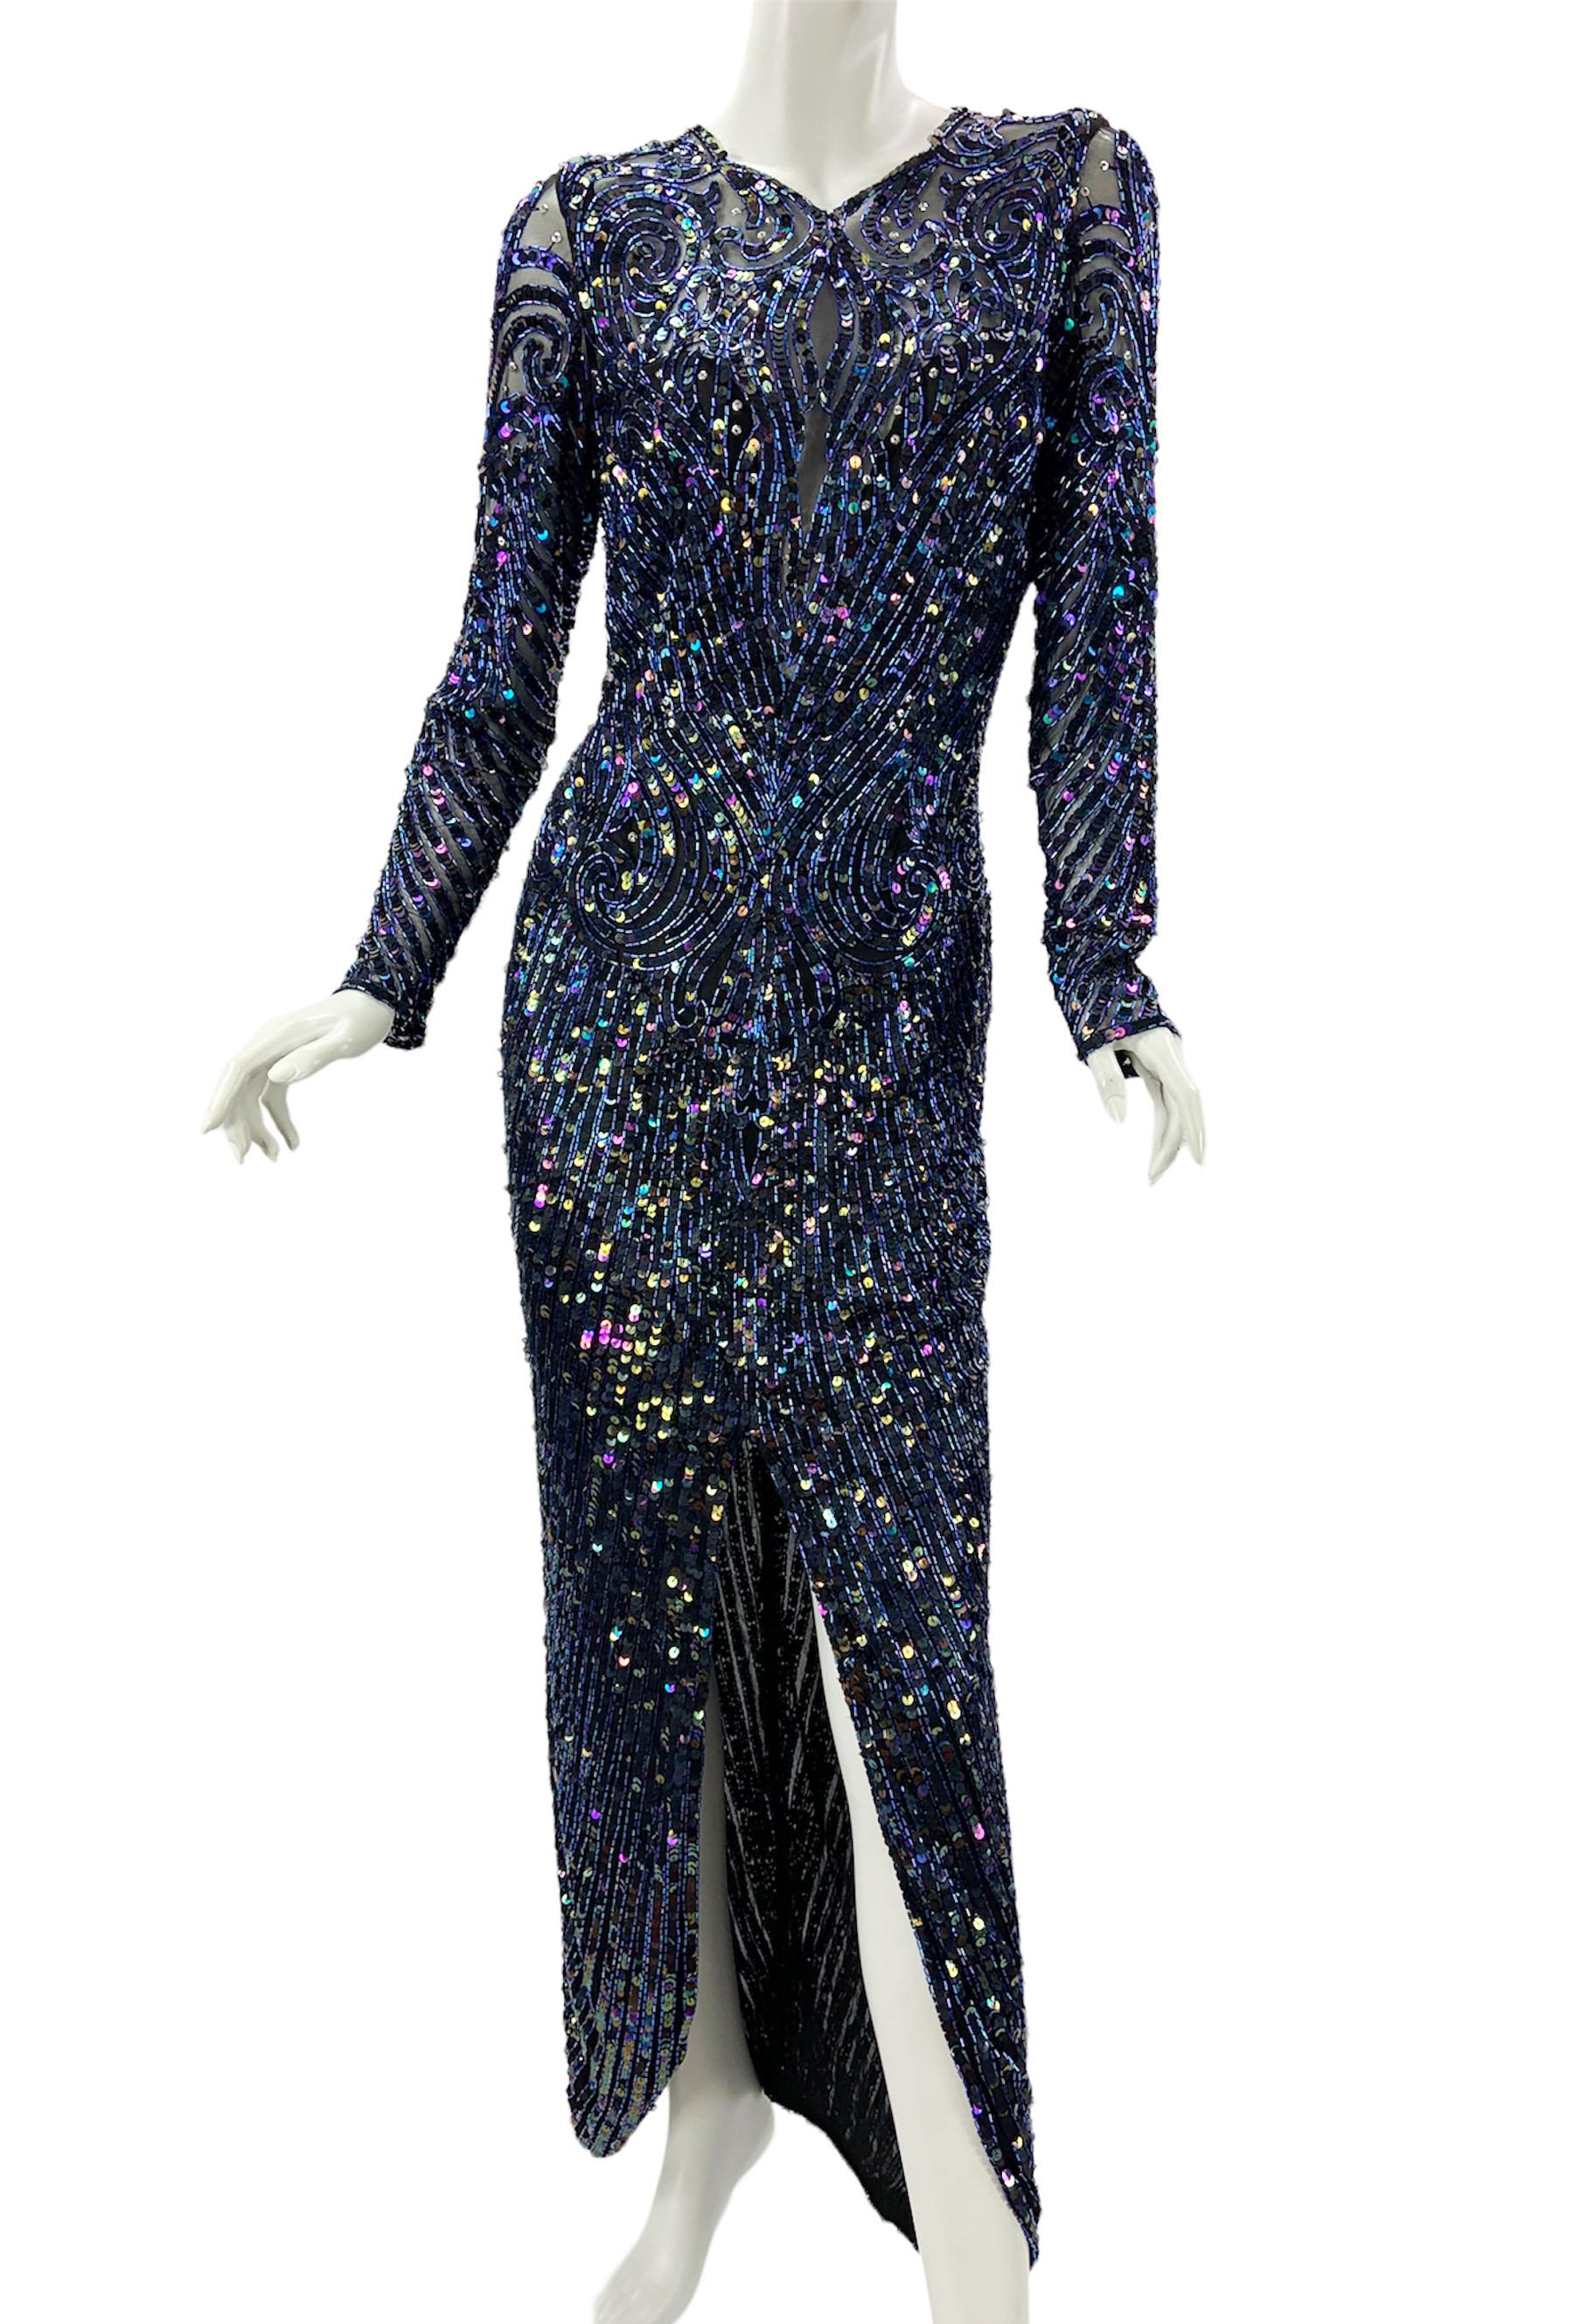 Vintage Bob Mackie Fully Embellished Long Dress Gown
Designer size 10 ( pls. check measurements).
Hand Beaded, 100% Silk, Navy Blue Beads and Multicolor Sequins Over the Black Tulle. 
Fully Lined in Semi Sheer Fabric, Back Zip Closure, Zipper Close